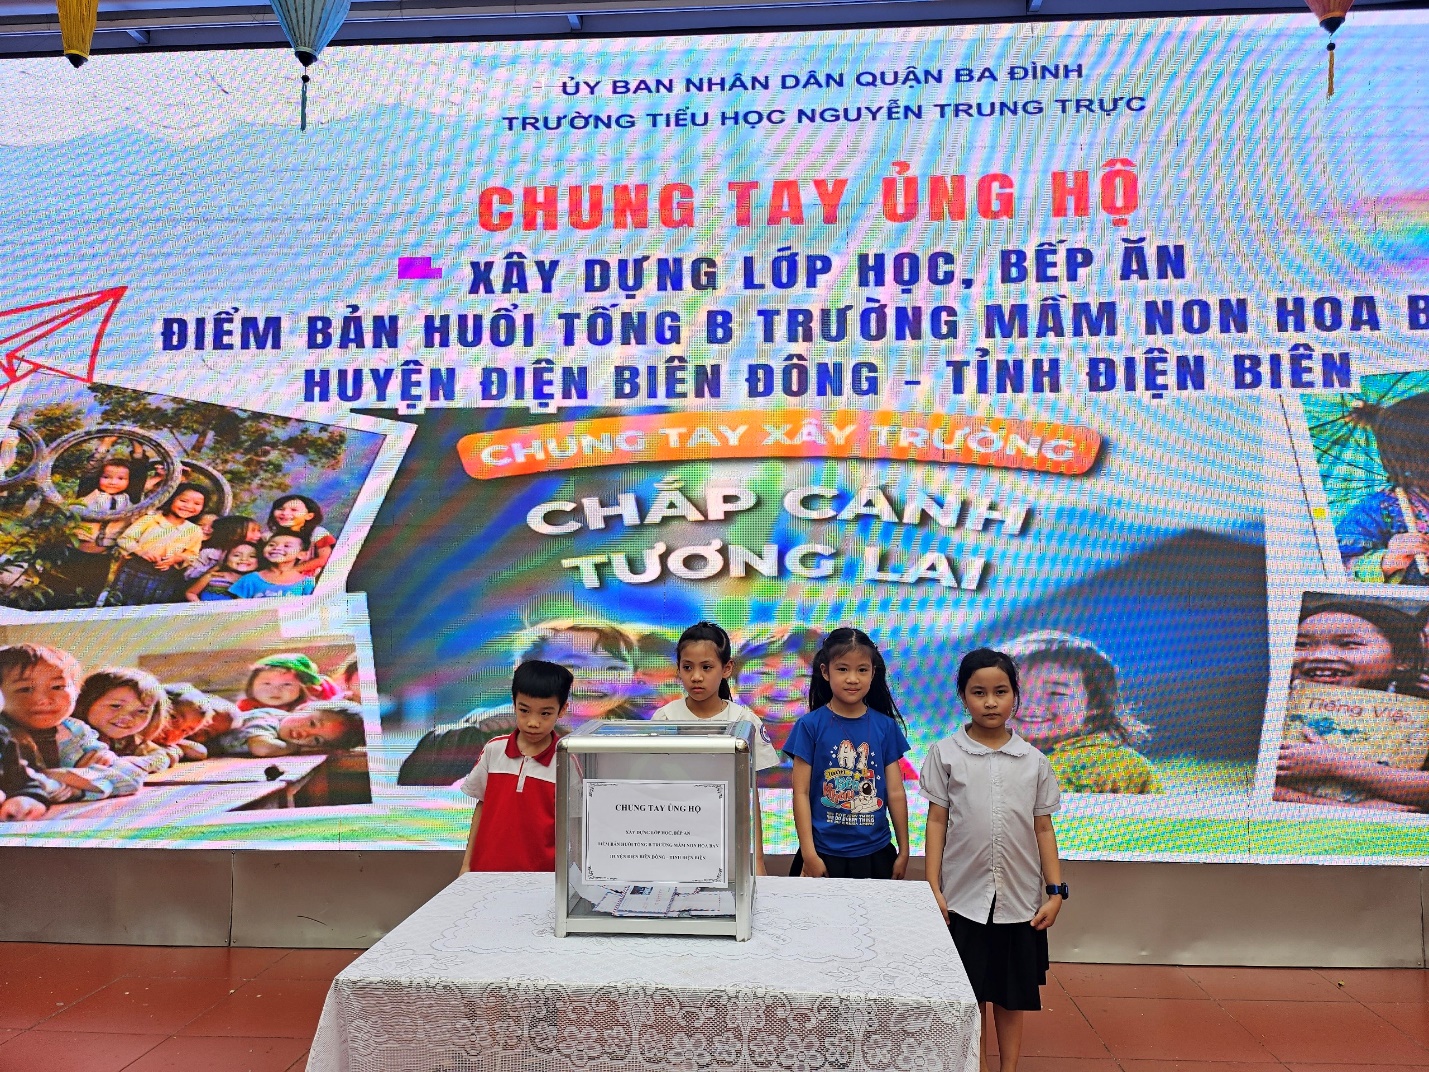 A group of children standing in front of a large screen

Description automatically generated